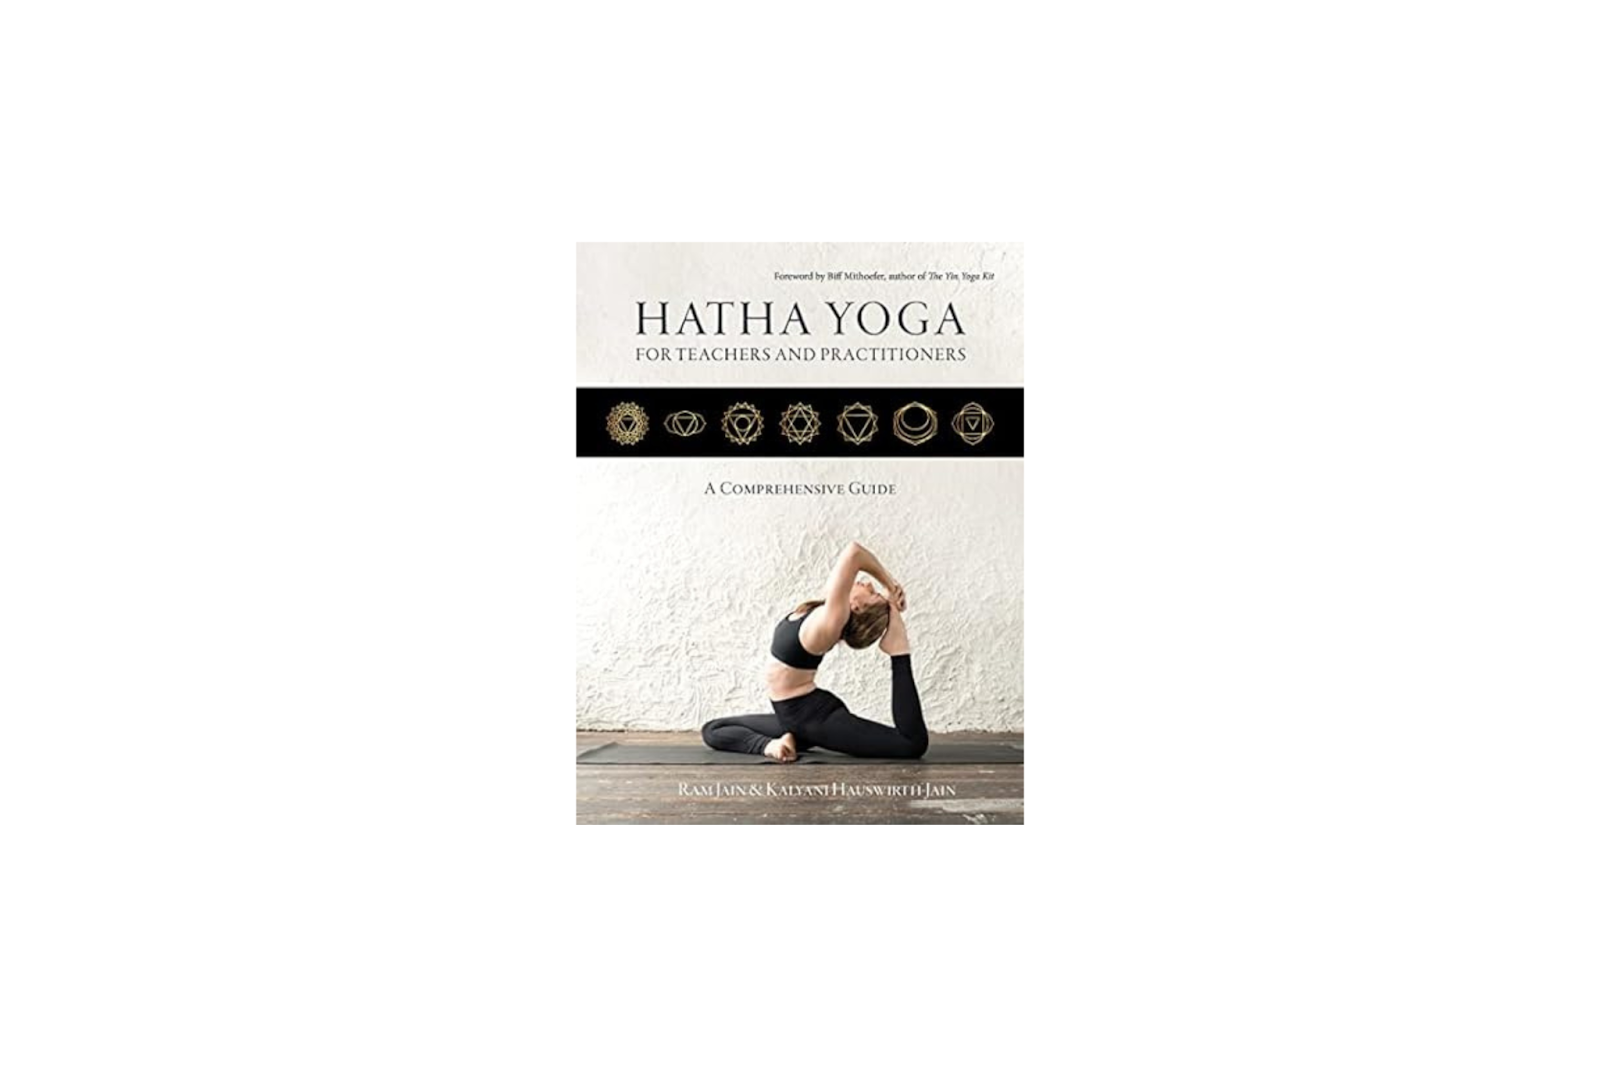  Hatha Yoga for Teachers and Practitioners: A Comprehensive Guide by Ram Jain